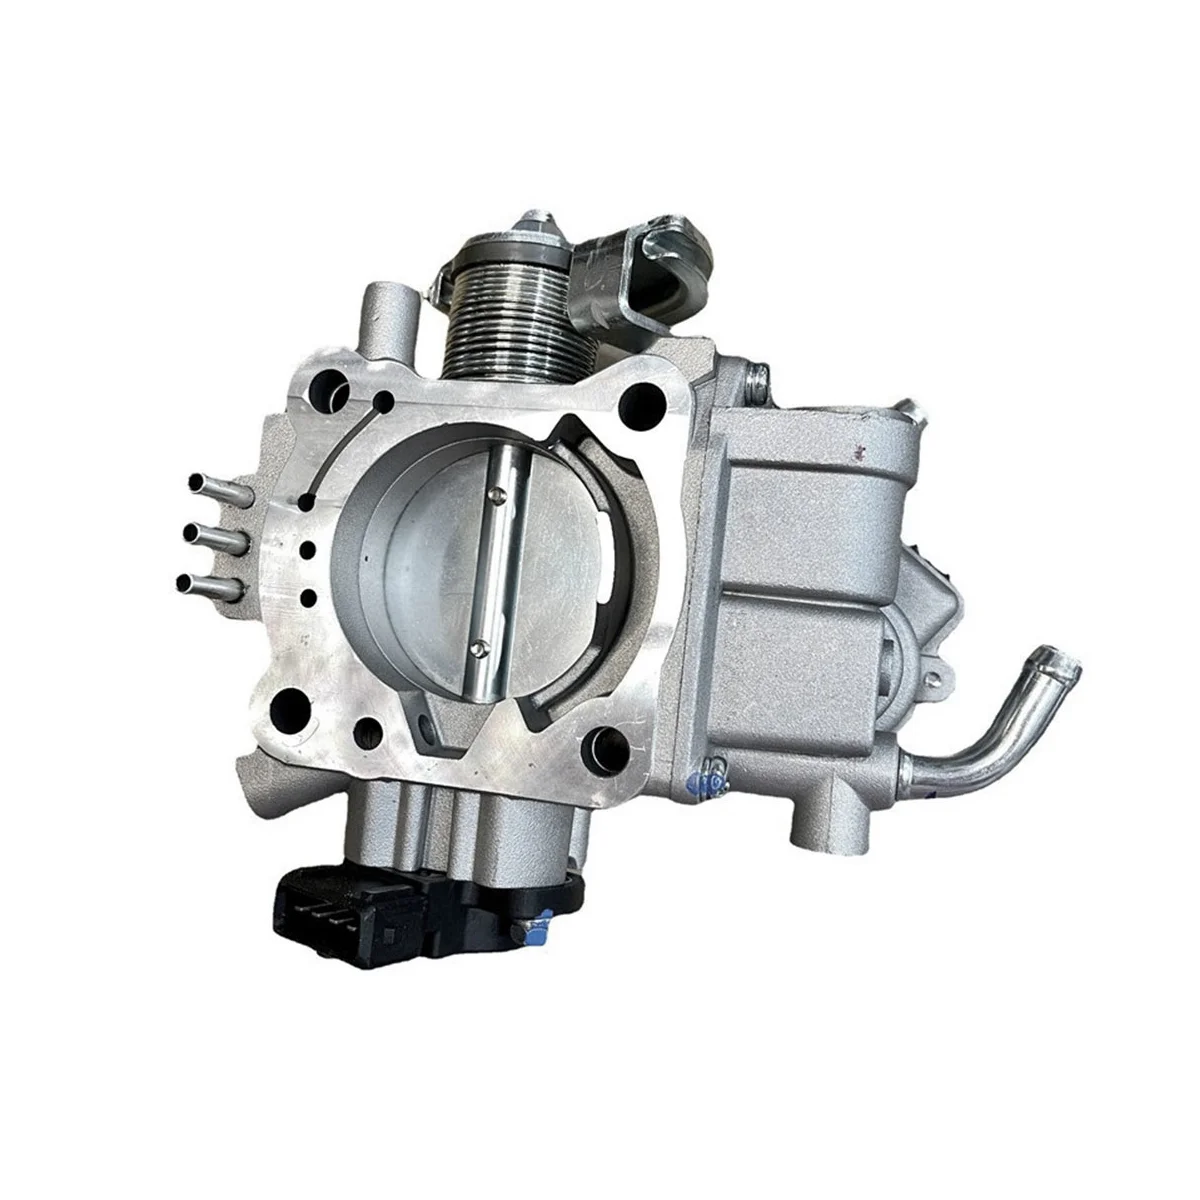 Auto Throttle Body embly for  Galant 2.0L 2WD Engine Code 4G64 4G63 MR579011 MD3 - £362.23 GBP